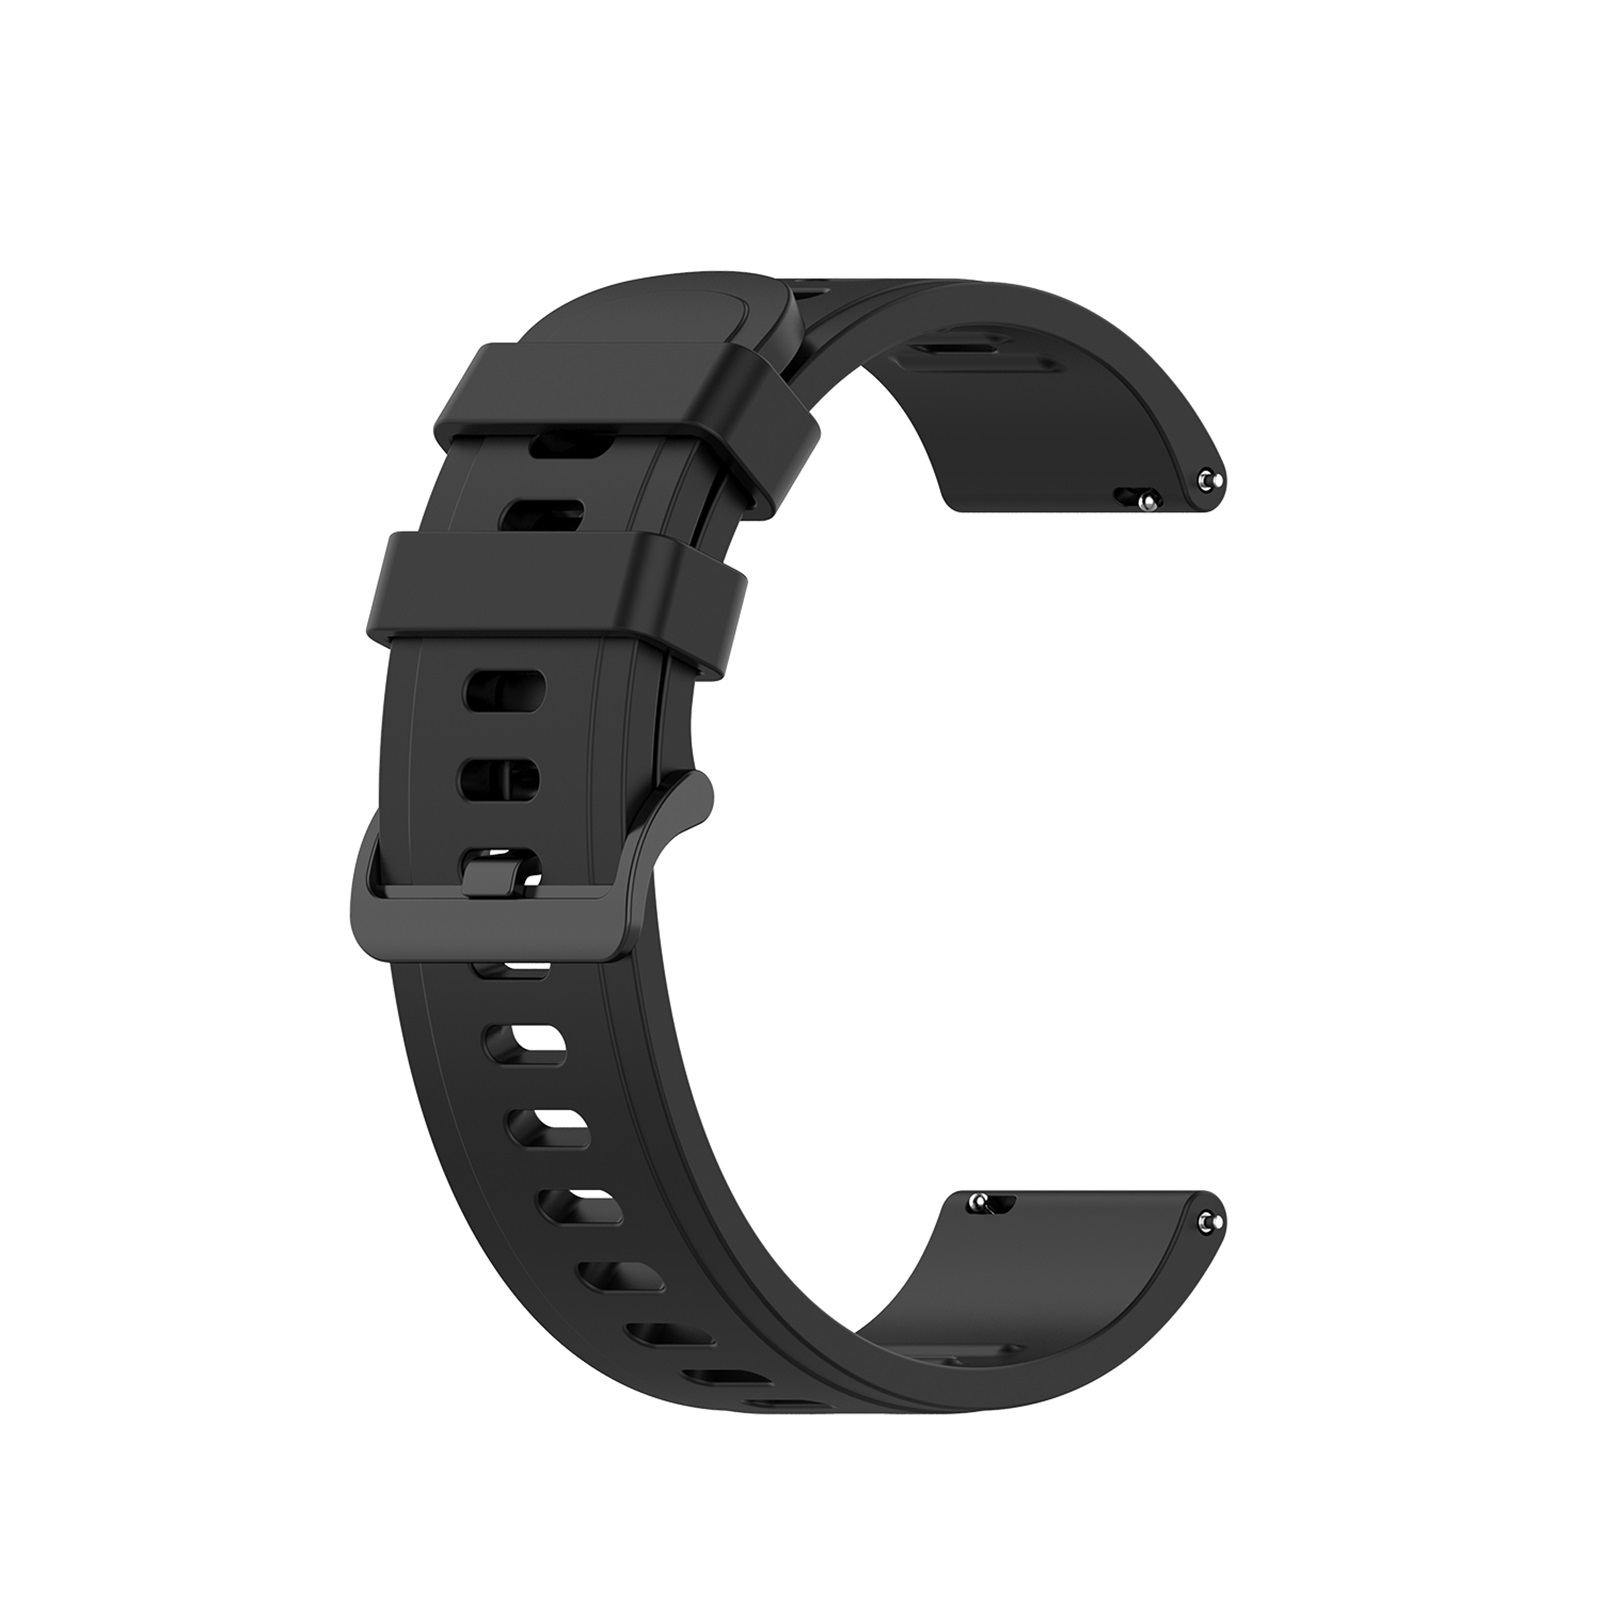 Bakeey-20mm-Multi-color-Silicone-Smart-Watch-Band-Replacement-Strap-For-Zeblaze-GTR--Haylou-LS02-1785338-4